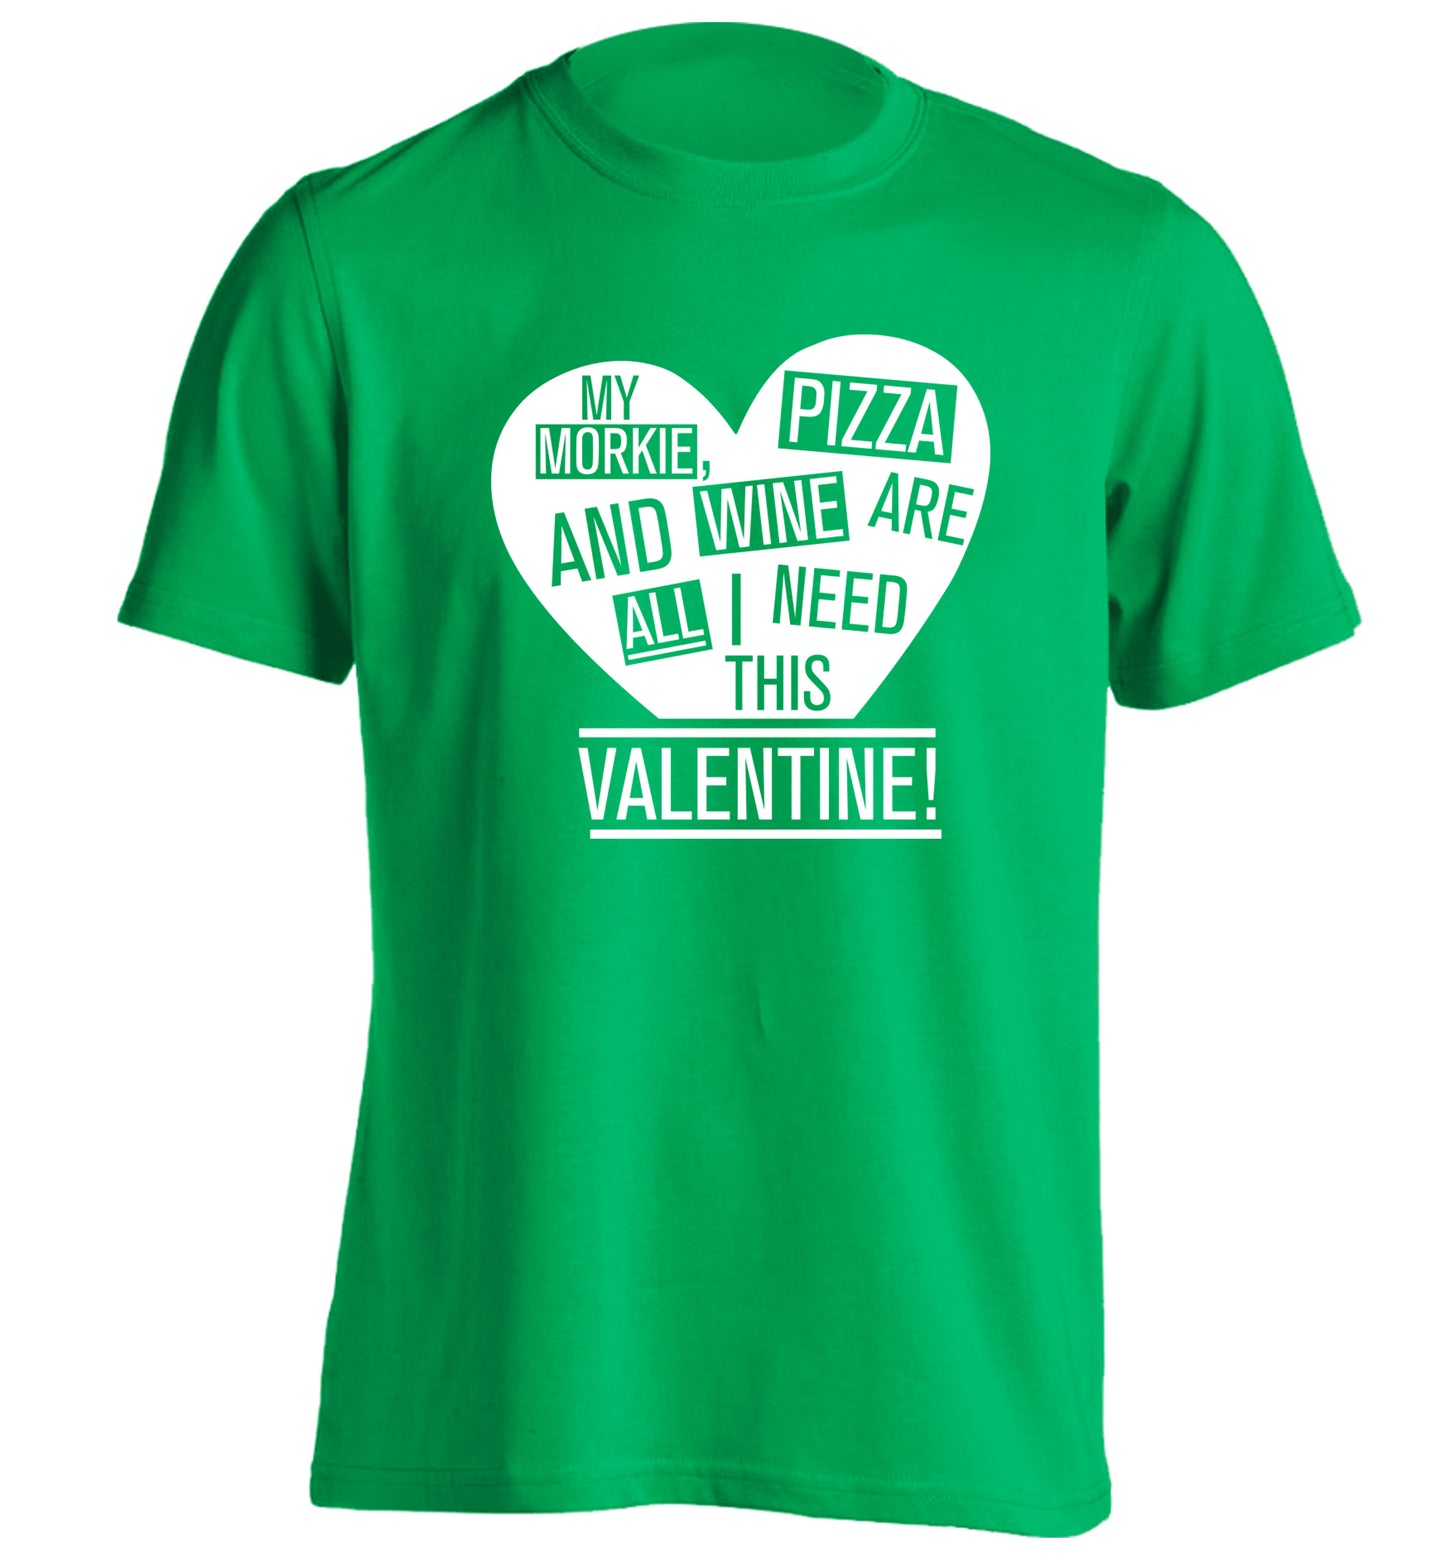 My morkie, pizza and wine are all I need this valentine! adults unisex green Tshirt 2XL